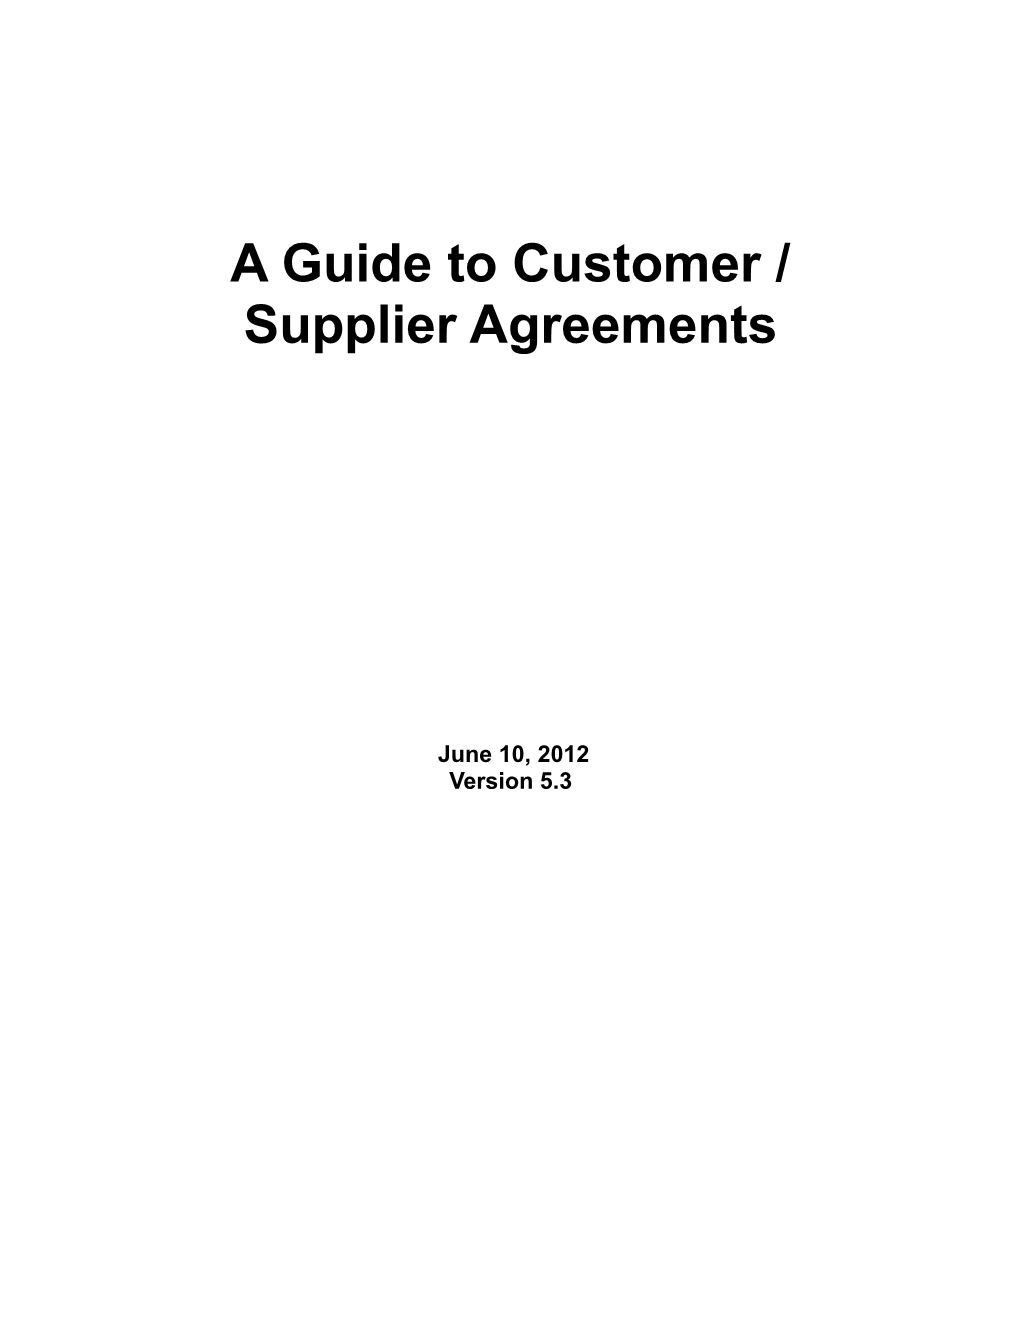 A Guide to Customer/Supplier Agreements